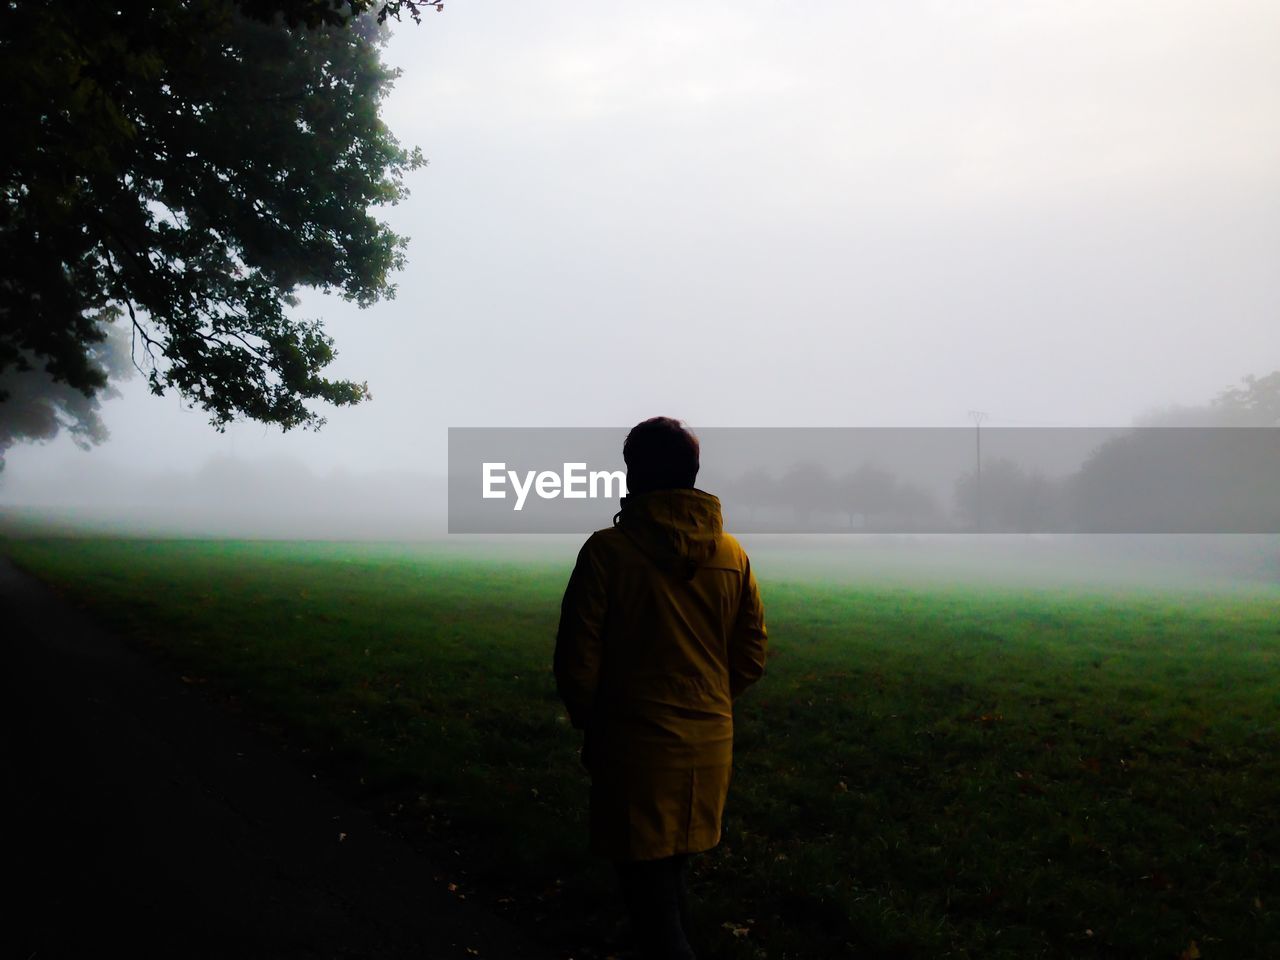 Rear view of person standing on grassy field during foggy weather